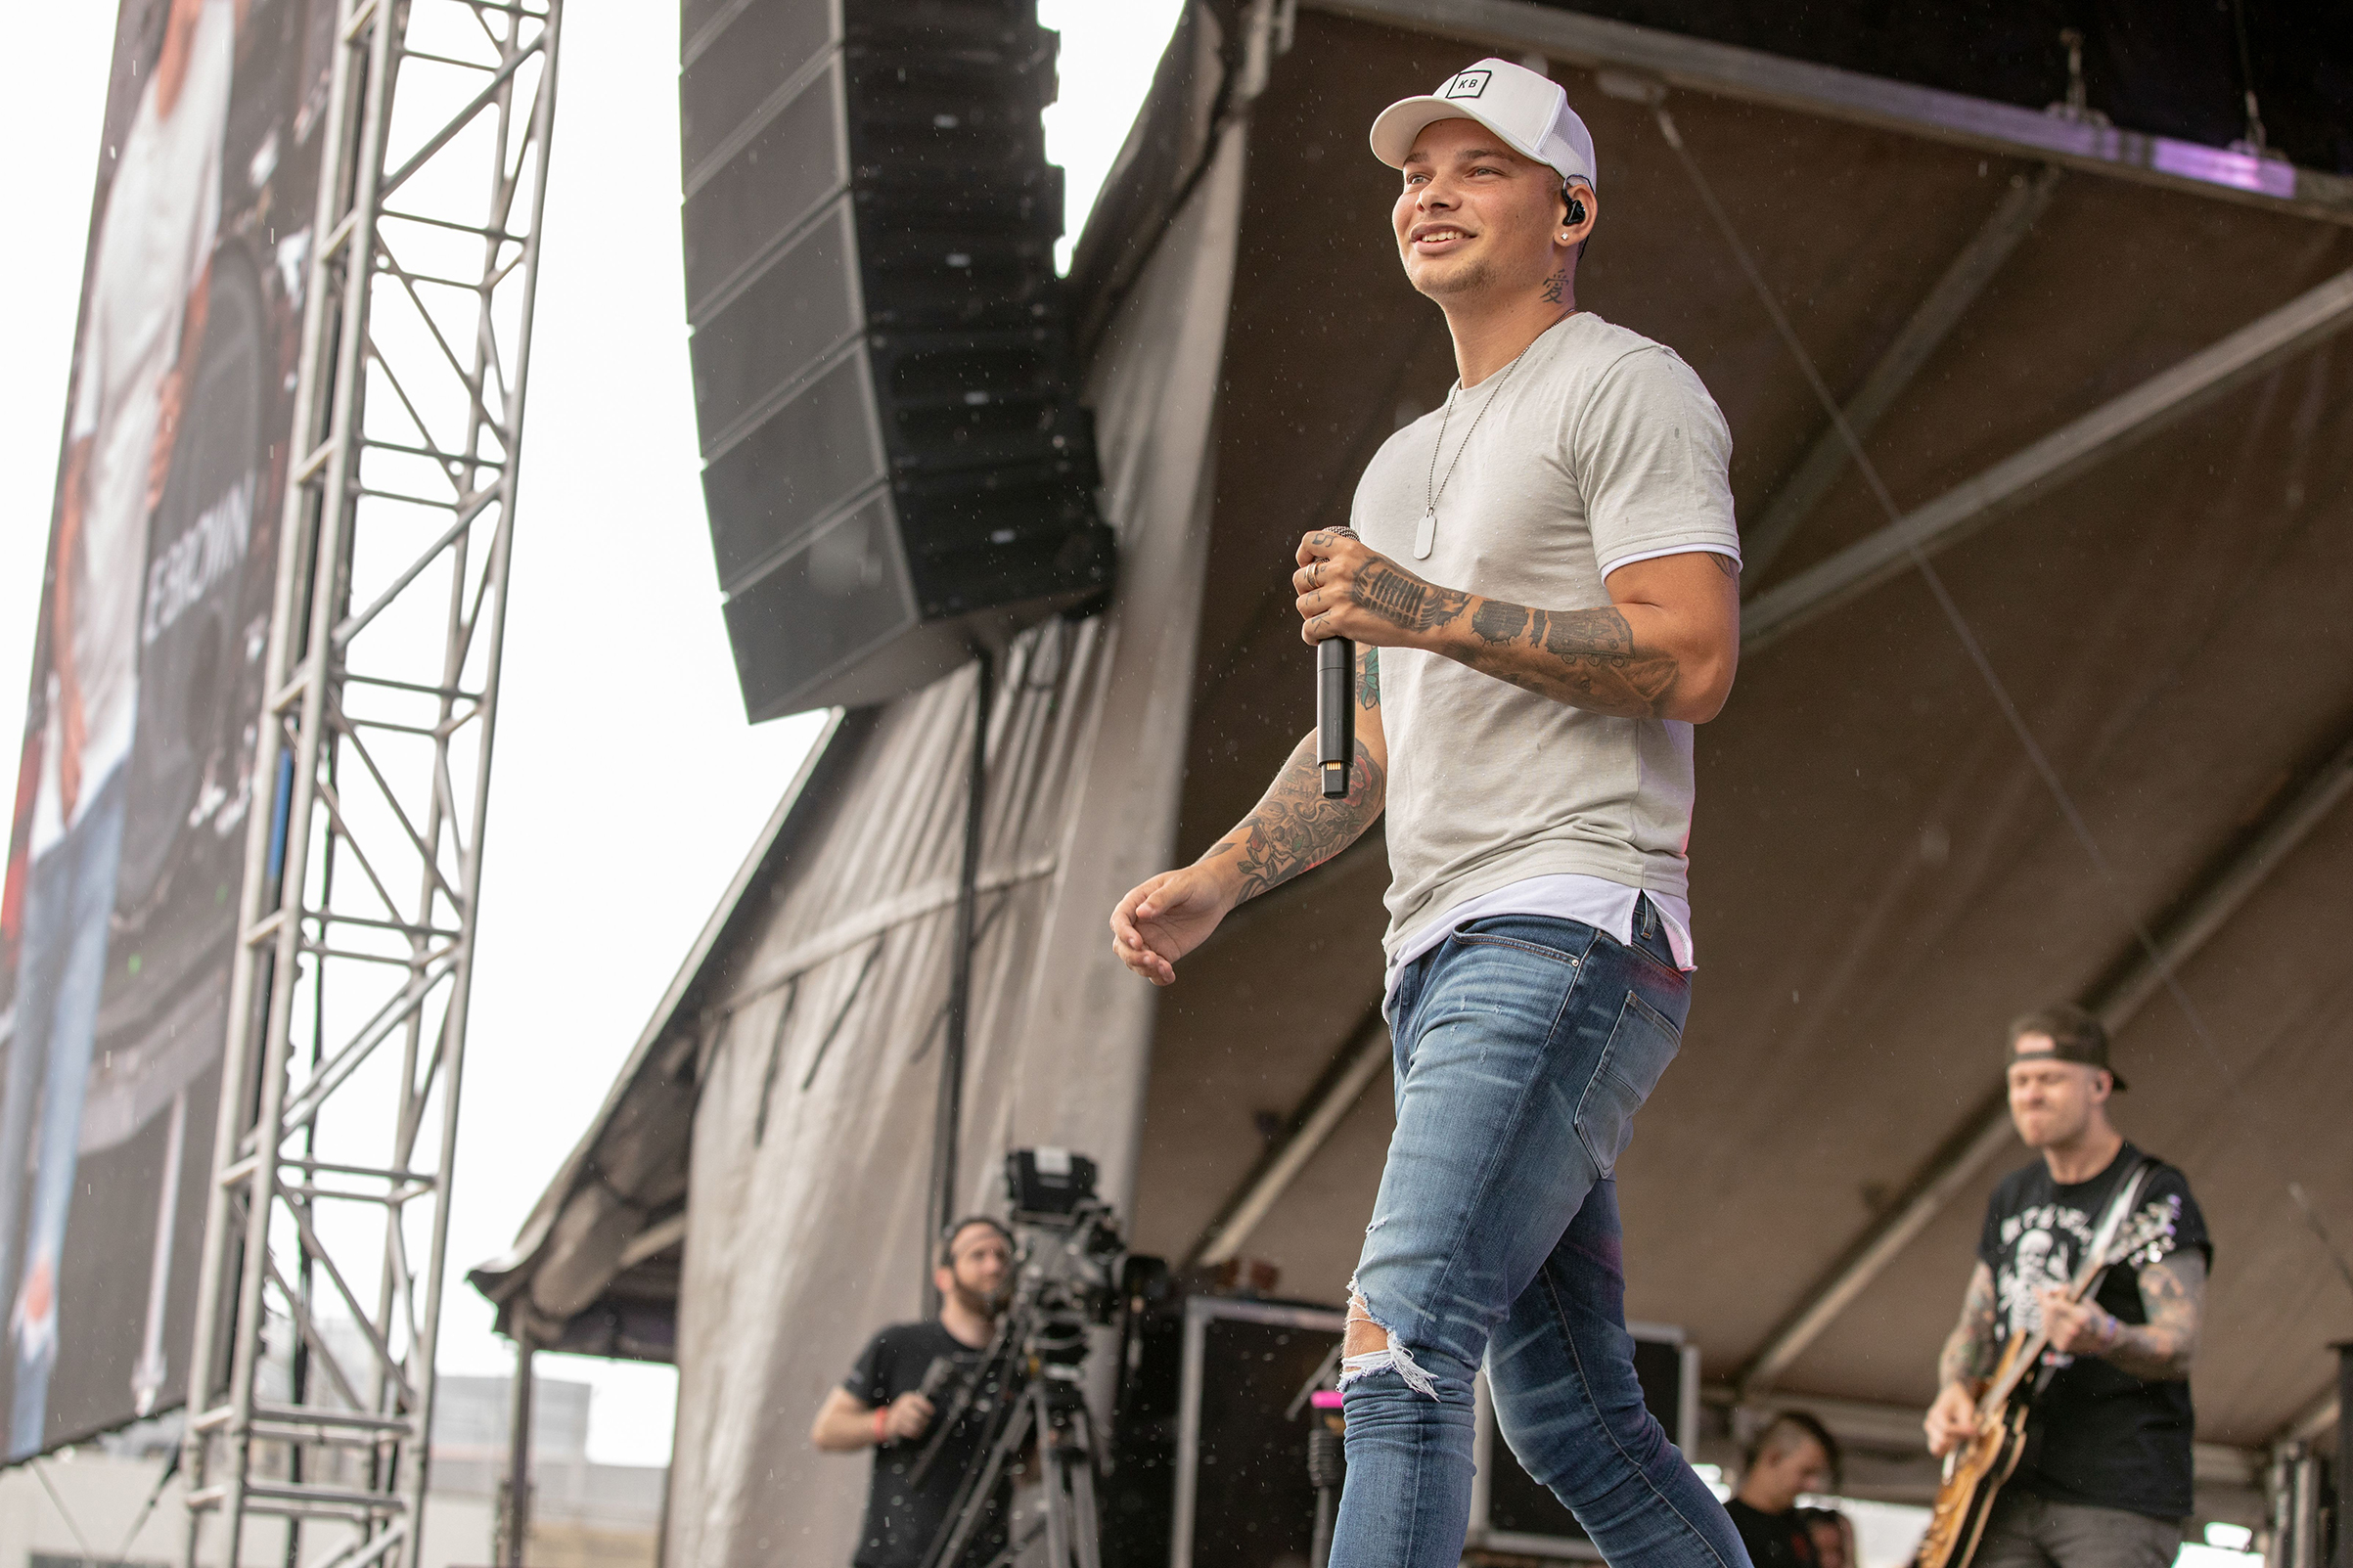 Kane Brown performs at the Windy City Smokeout Festival on July 15, 2018 in Chicago. (RMV/Shutterstock)